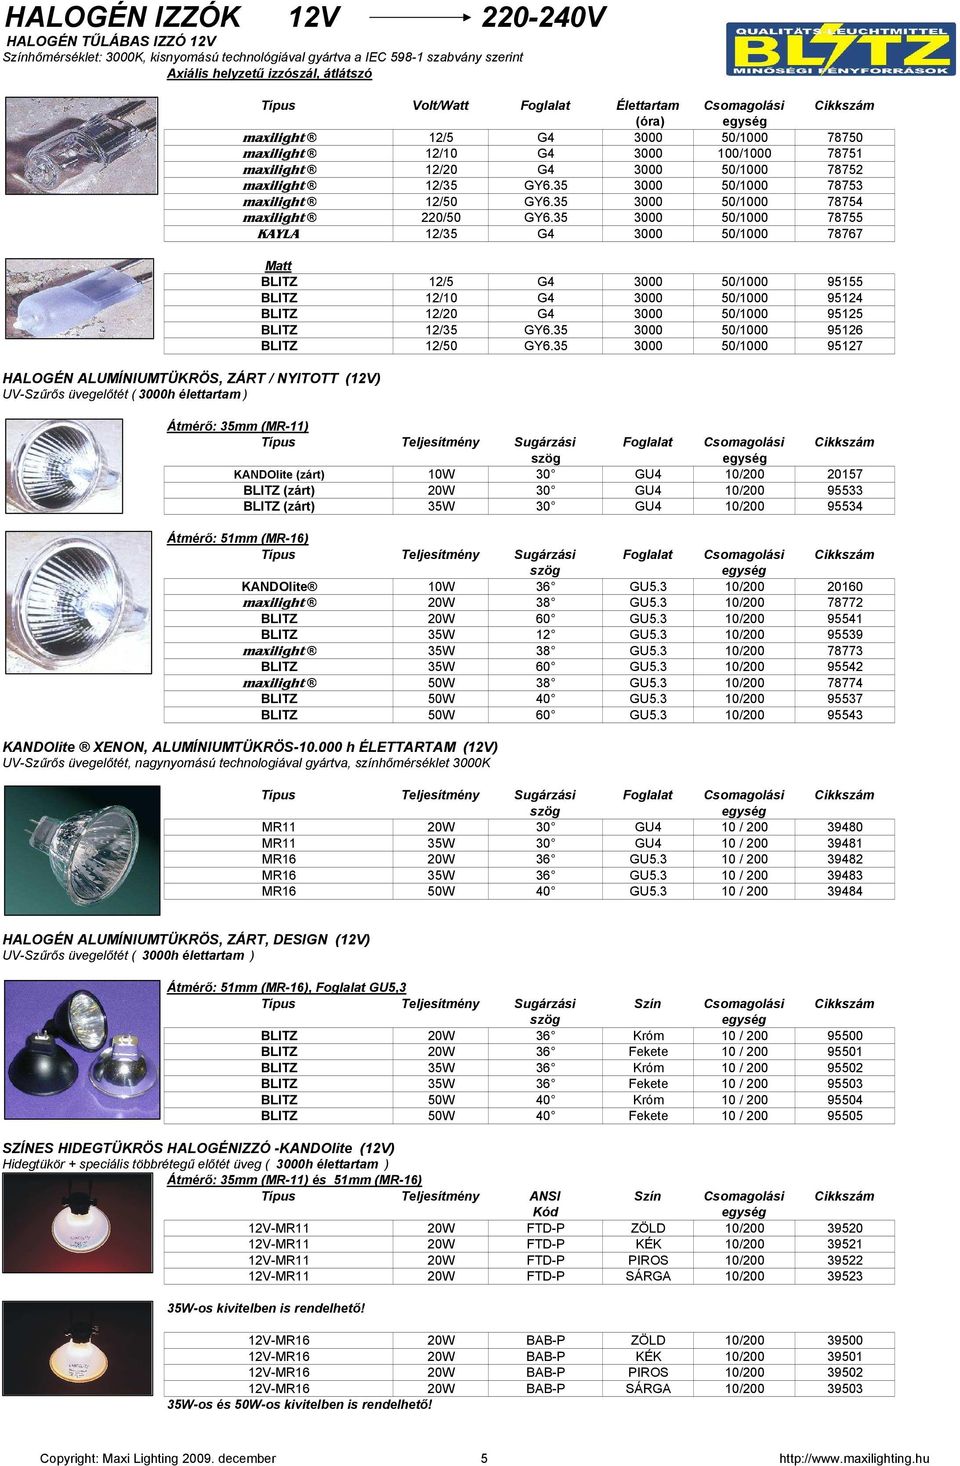 78751 maxilight 12/20 G4 3000 50/1000 78752 maxilight 12/35 GY6.35 3000 50/1000 78753 maxilight 12/50 GY6.35 3000 50/1000 78754 maxilight 220/50 GY6.